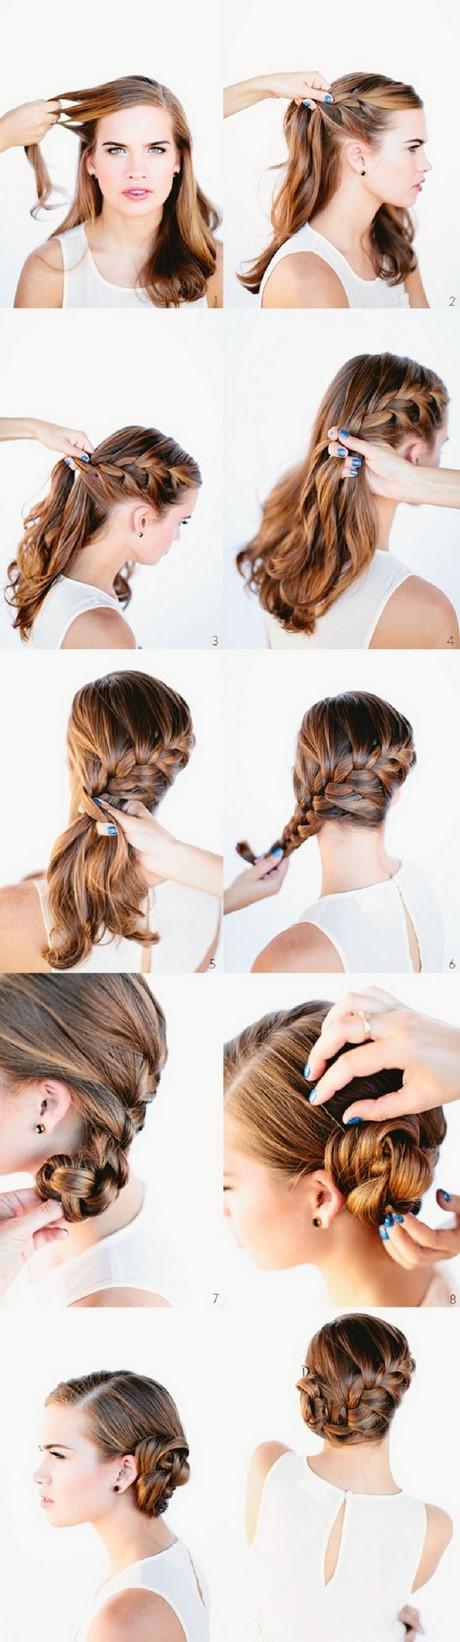 Top 10 braided hairstyles